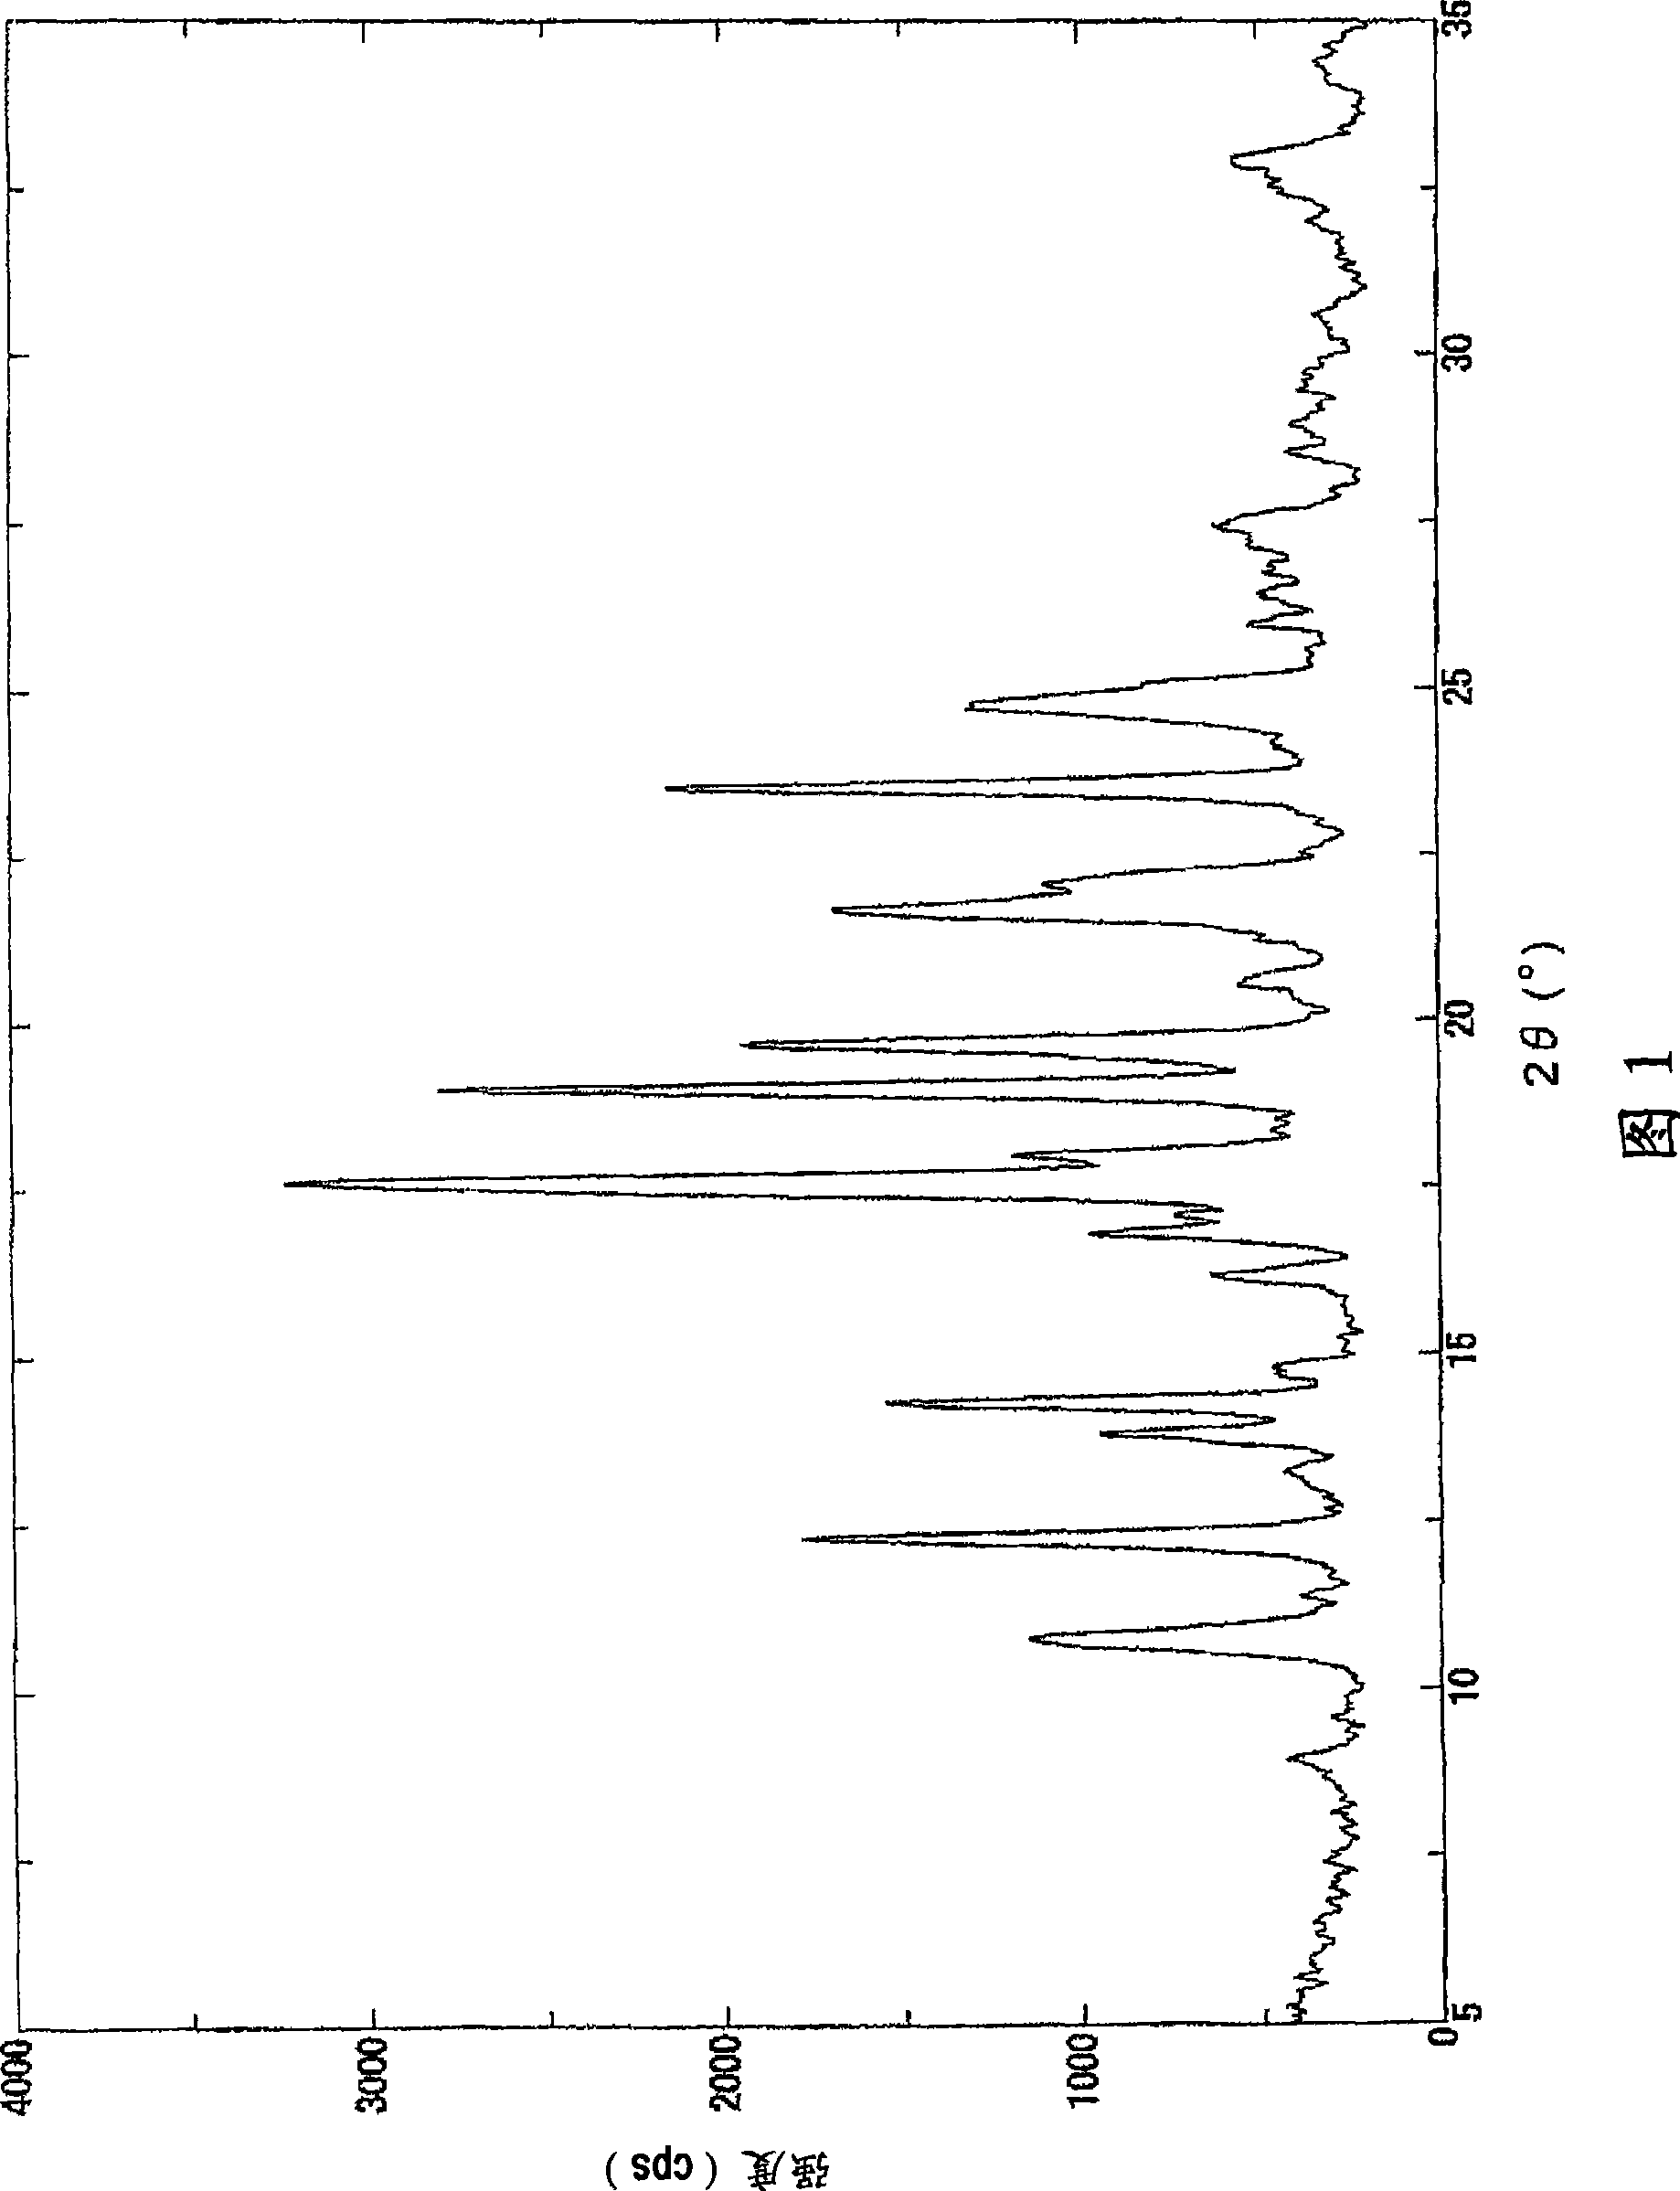 Salt of phenoxypyridine derivative or crystal thereof and process for producing the same